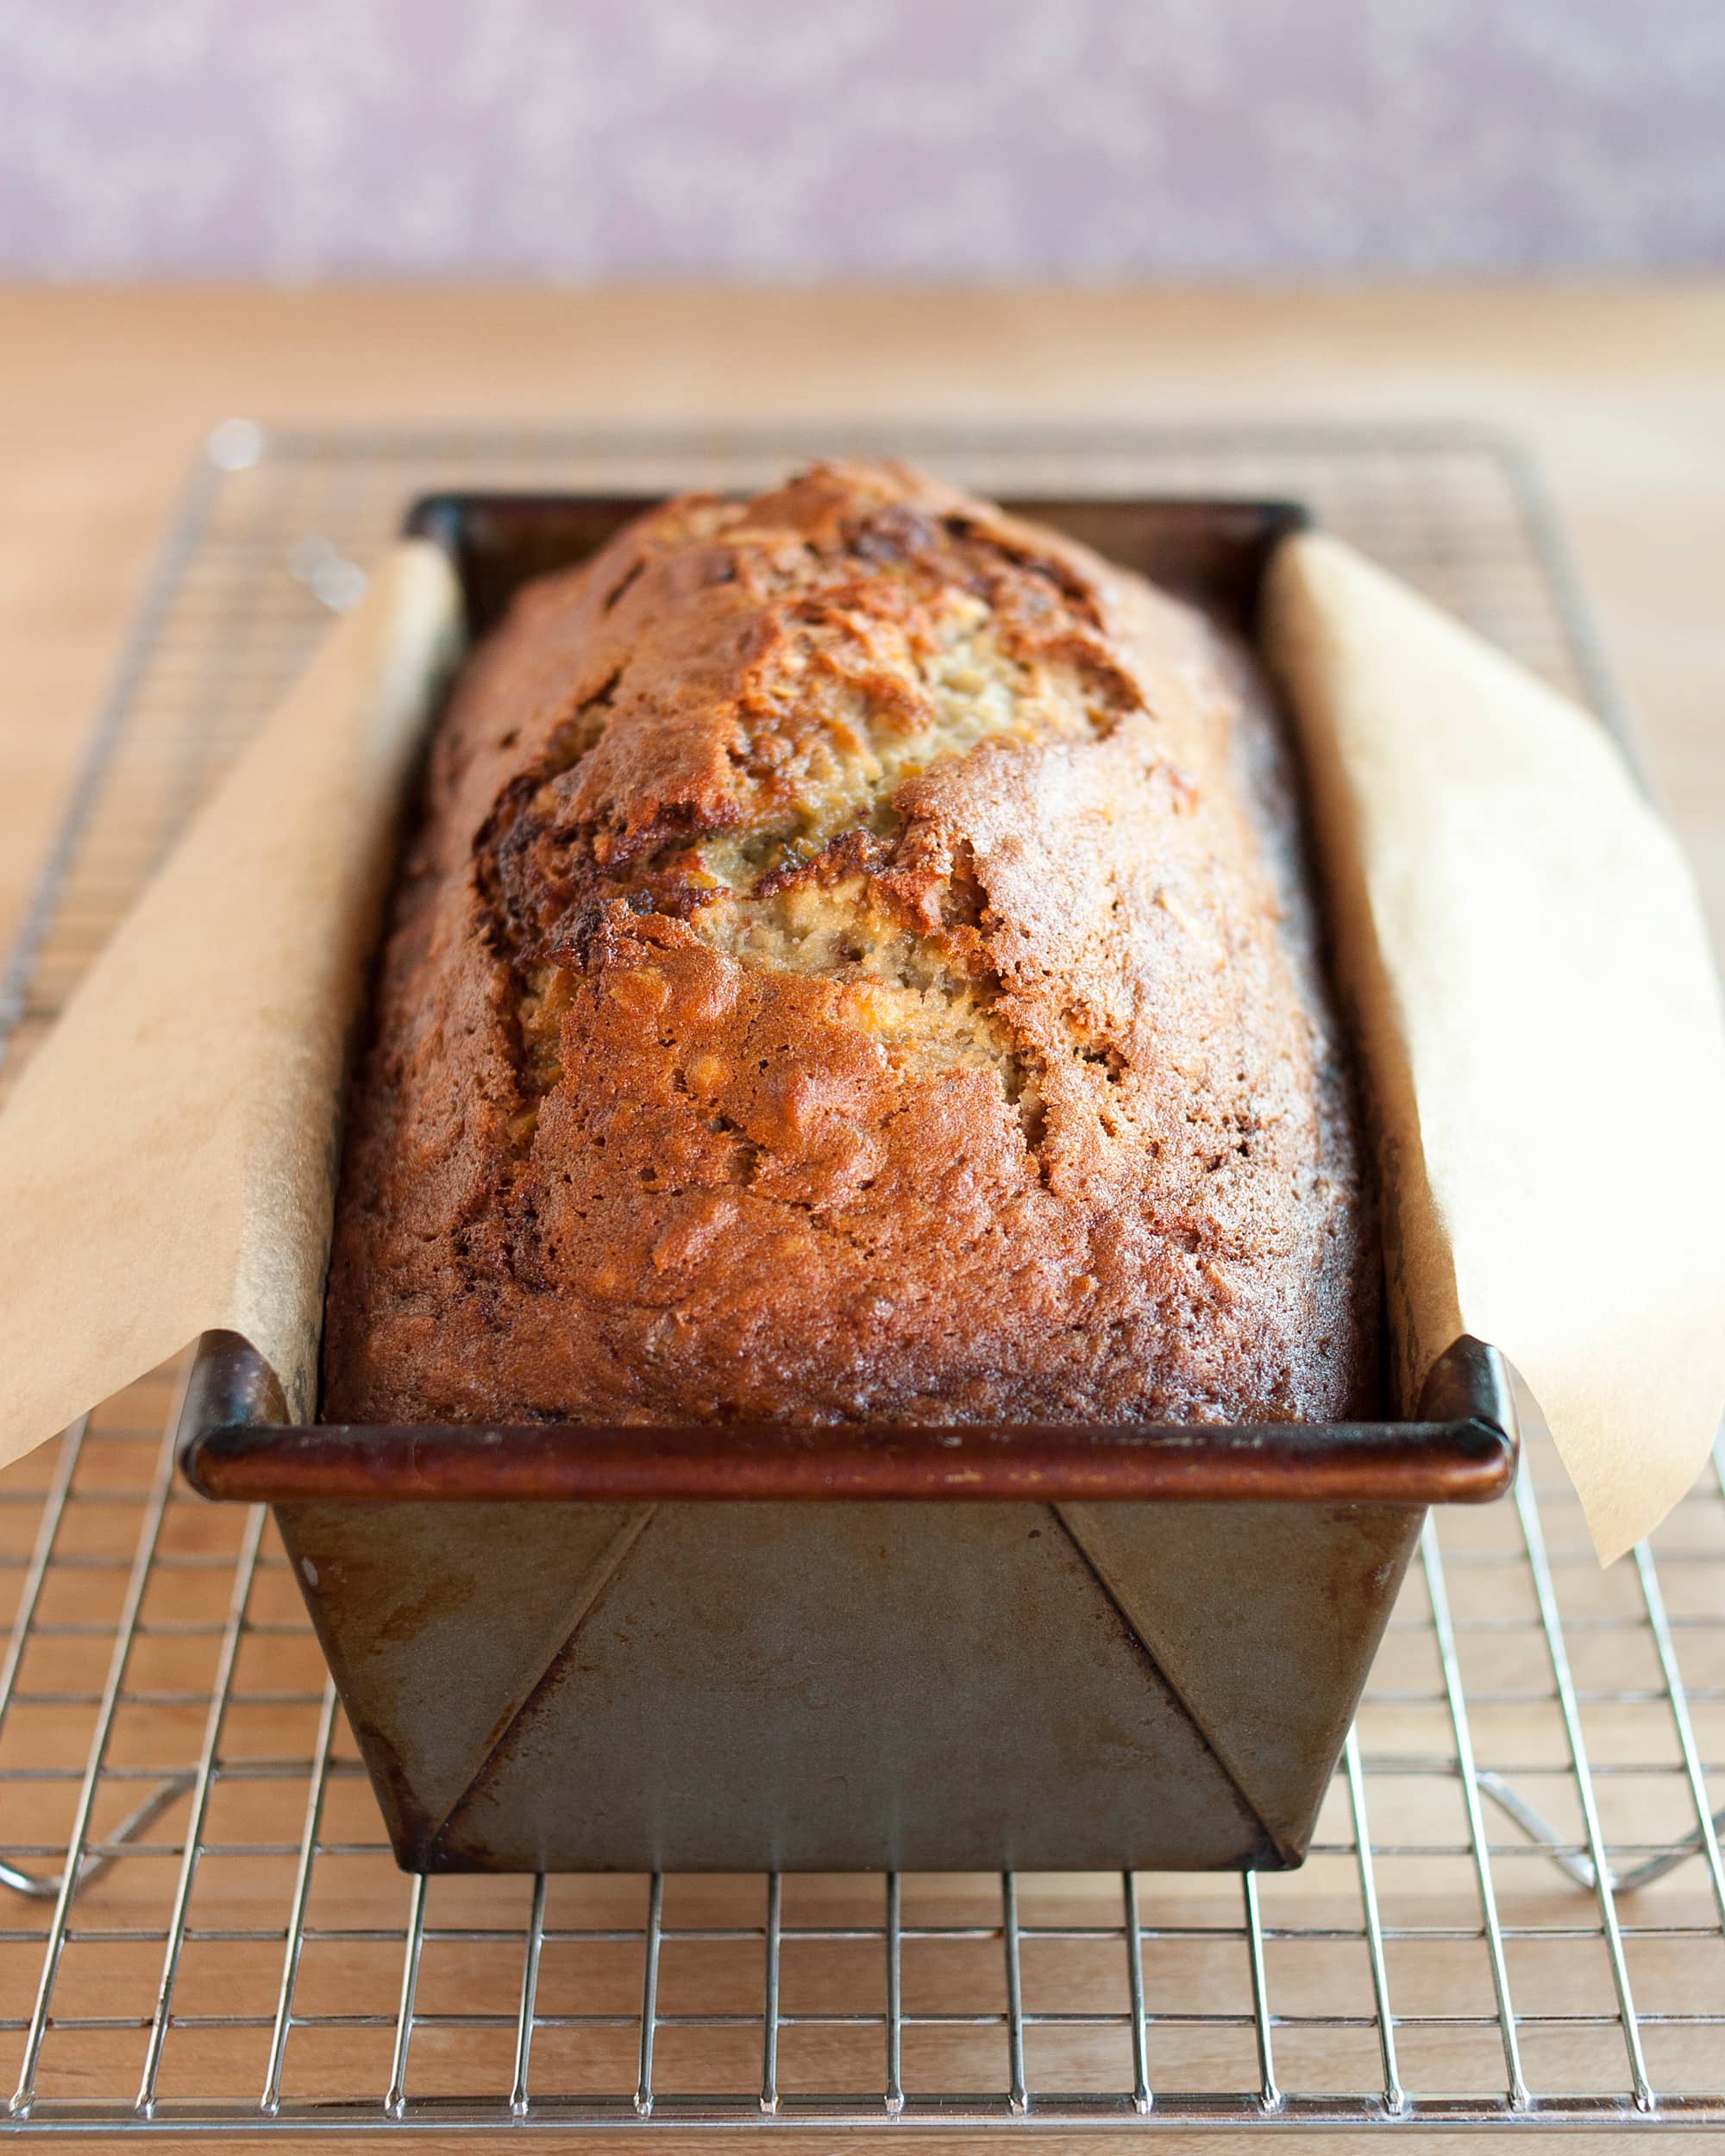 How To Make Banana Bread: The Simplest, Easiest Recipe | Kitchn